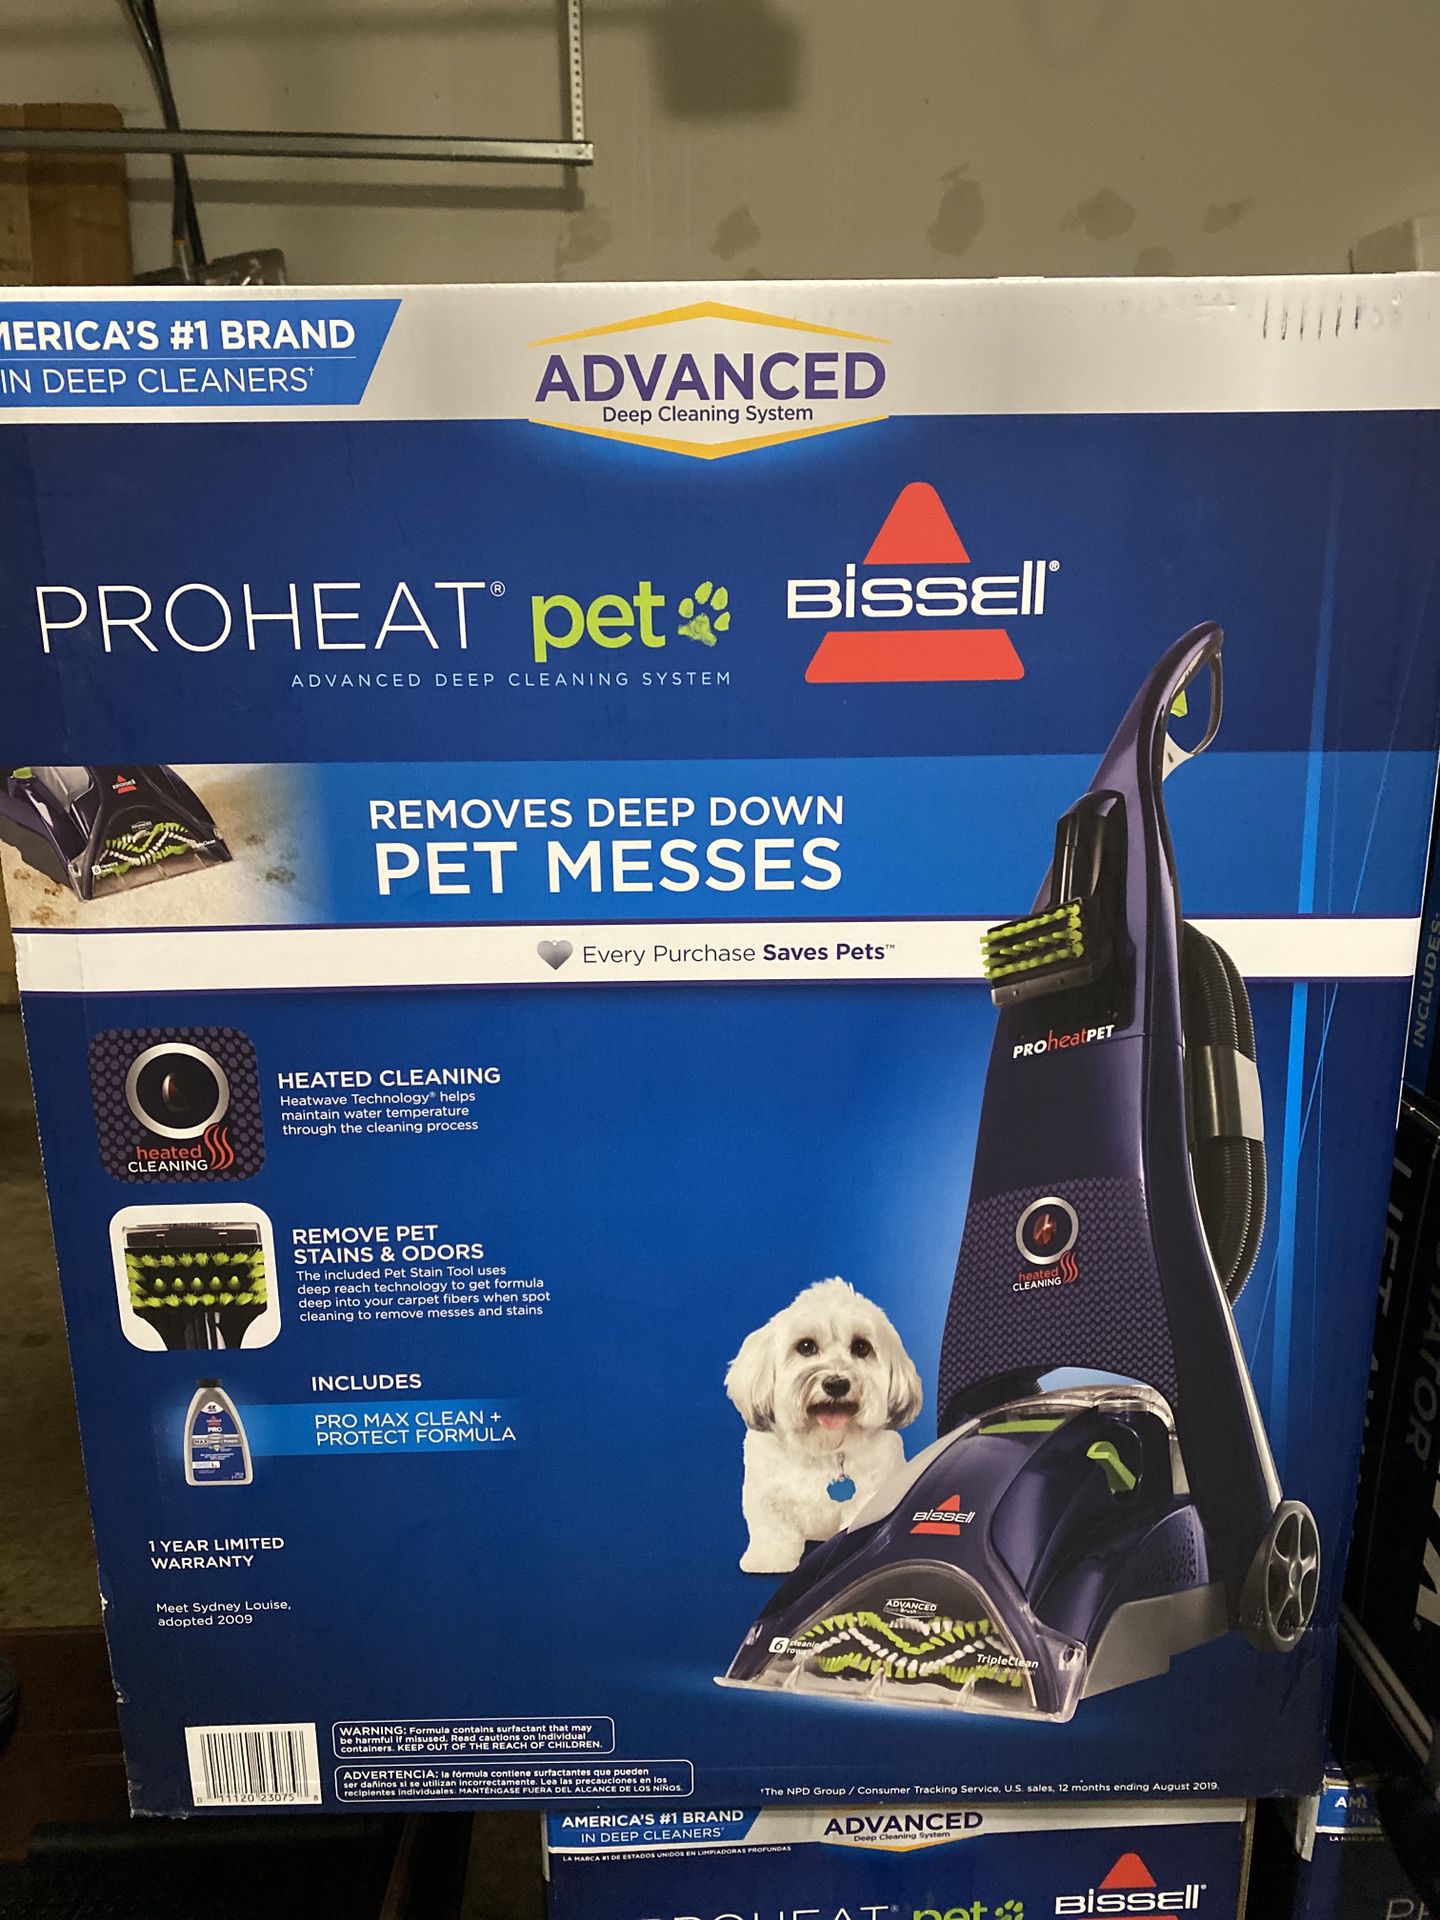 Bissell Carpet Cleaner ProHeat Pet Advanced Pet Stain Remover Rug Cleaner Pets